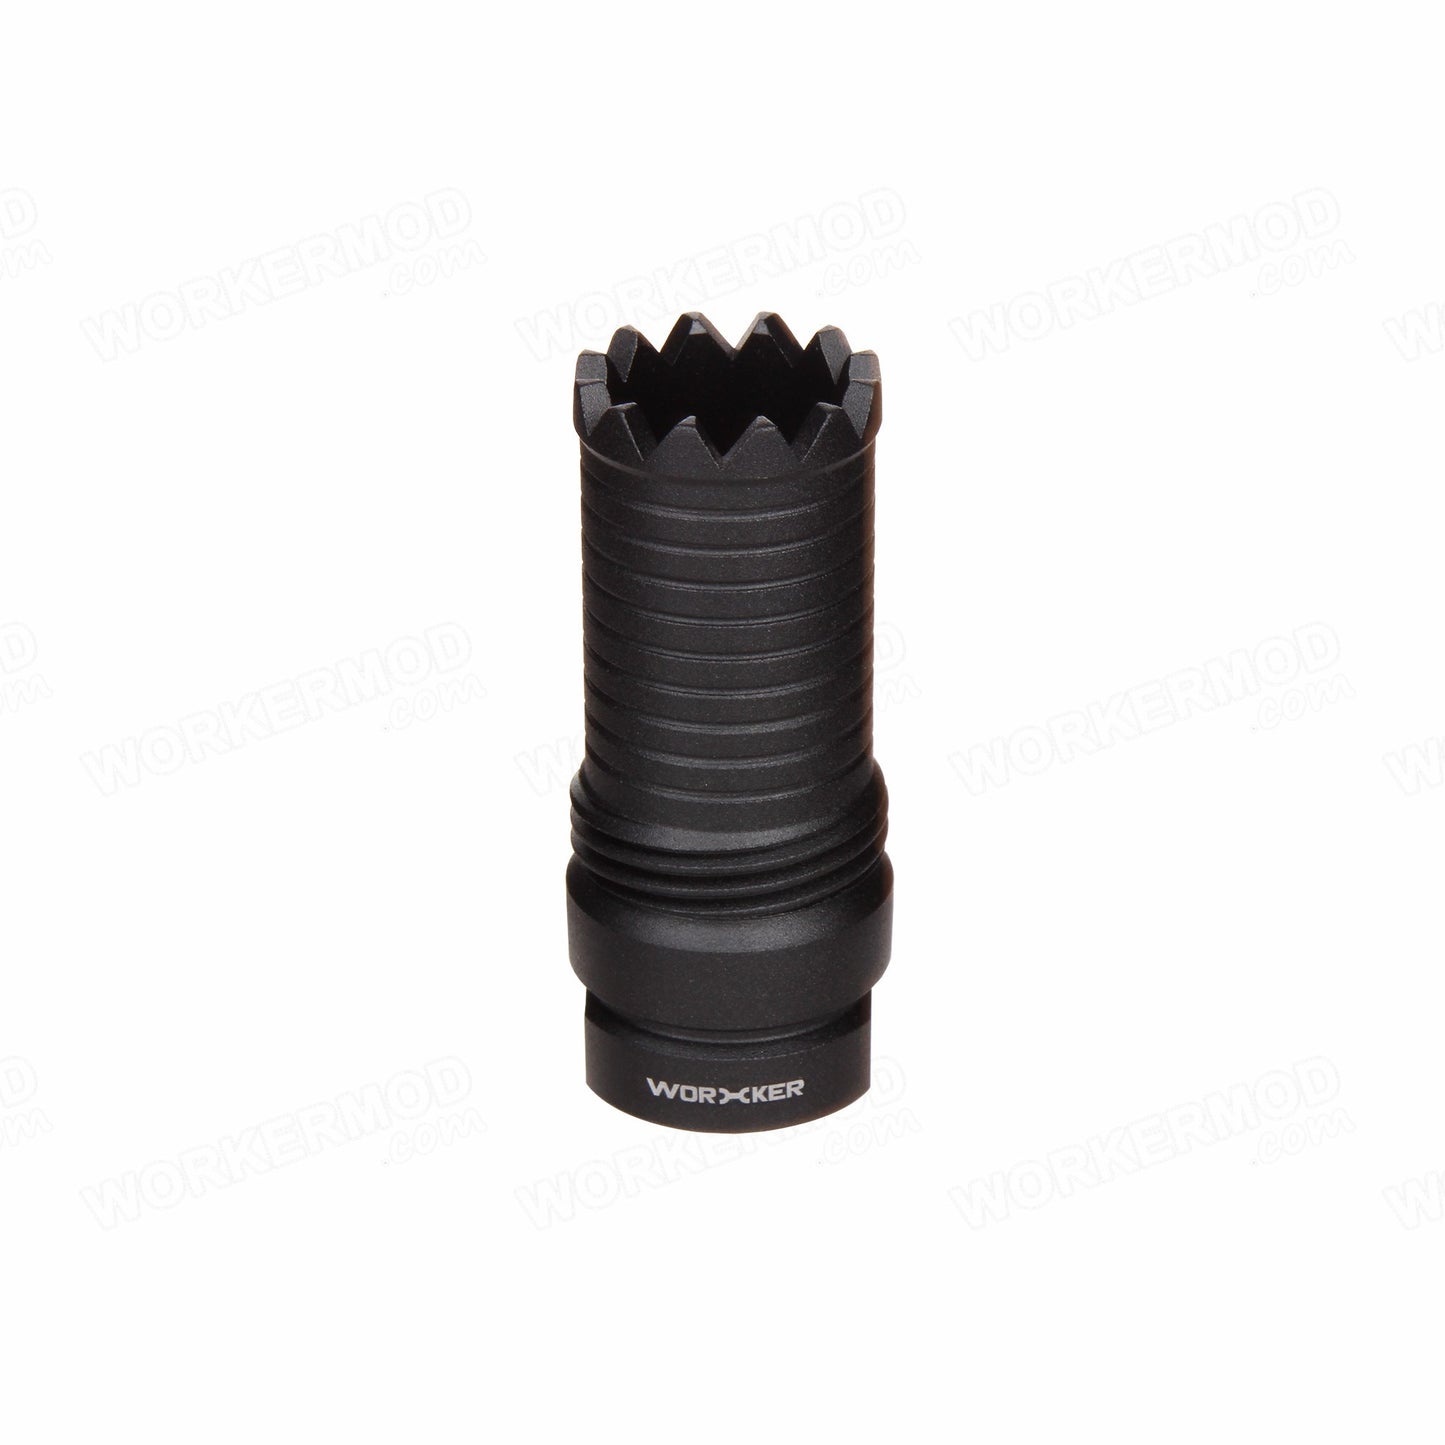 Worker Claymore Muzzle / Flash Hider (Threaded Connector) CLOSEOUT